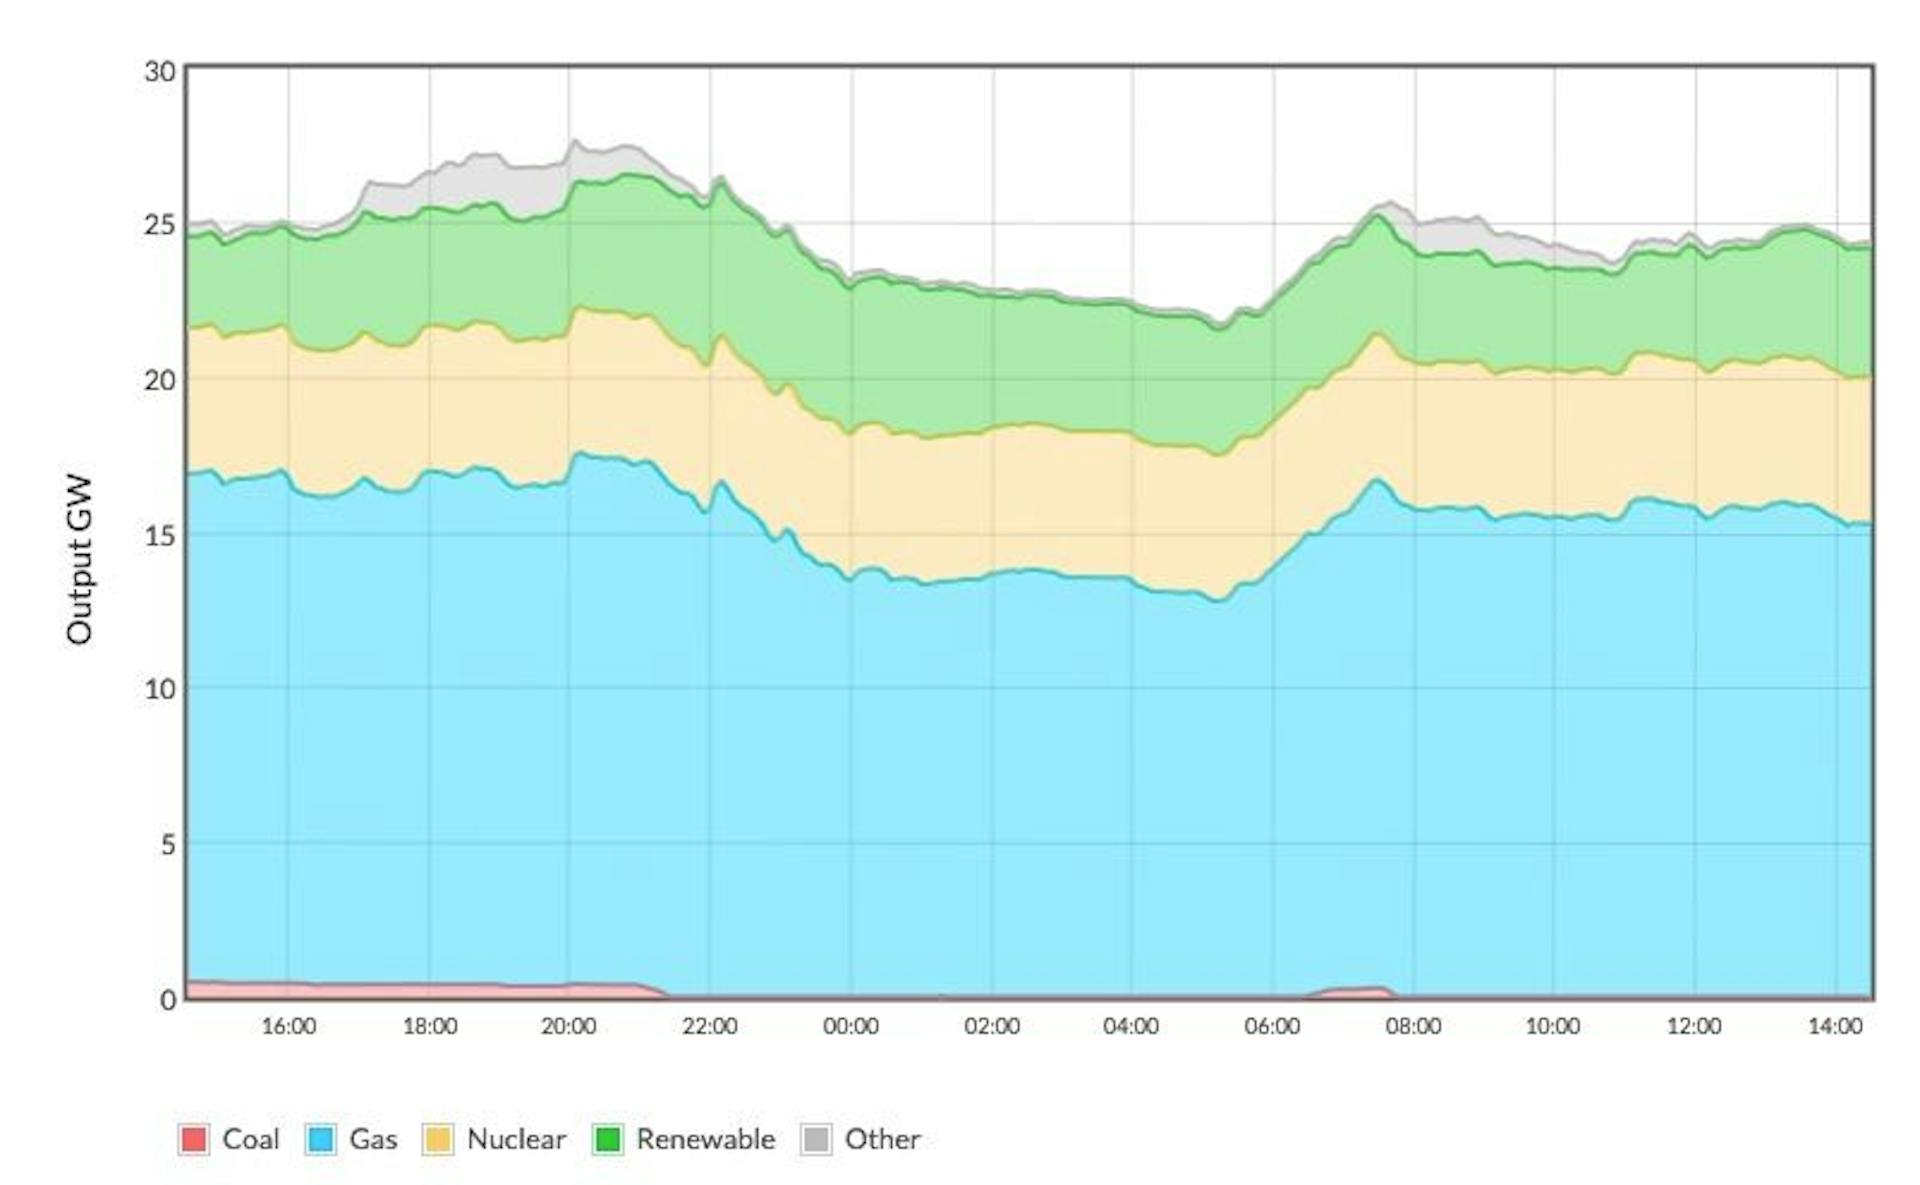 The fuel mix of UK electricity supply 2:30pm 24 August 2023 to 2:30pm 25 August 2023 - image courtesy of https://electricityinfo.org/fuel-mix-last-24-hours/